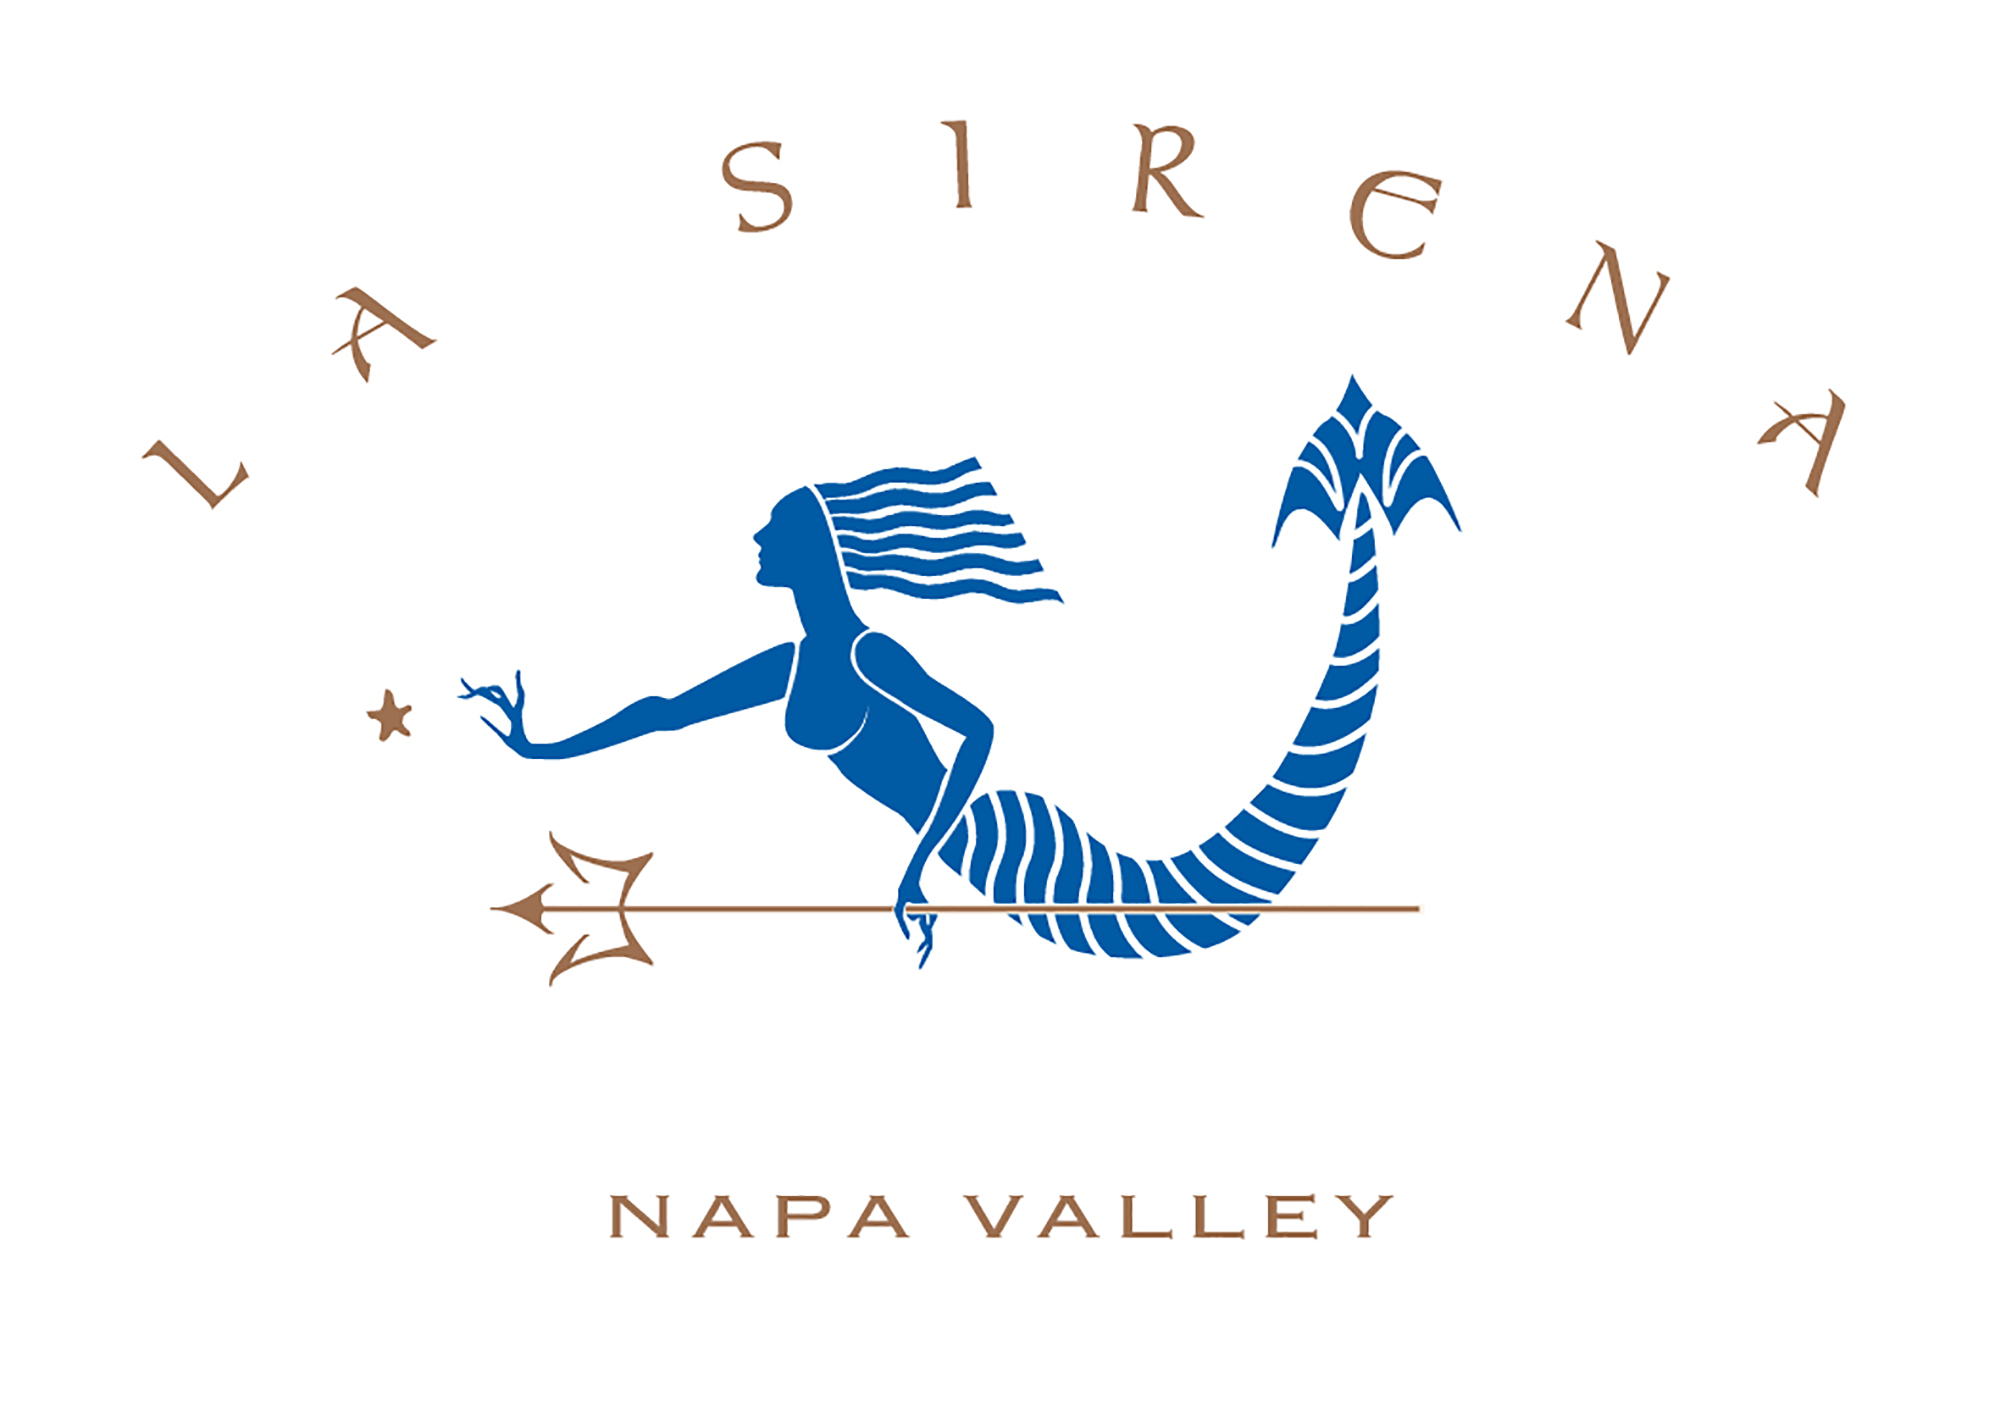 image shows the wine label with mermaid for la sirena wines